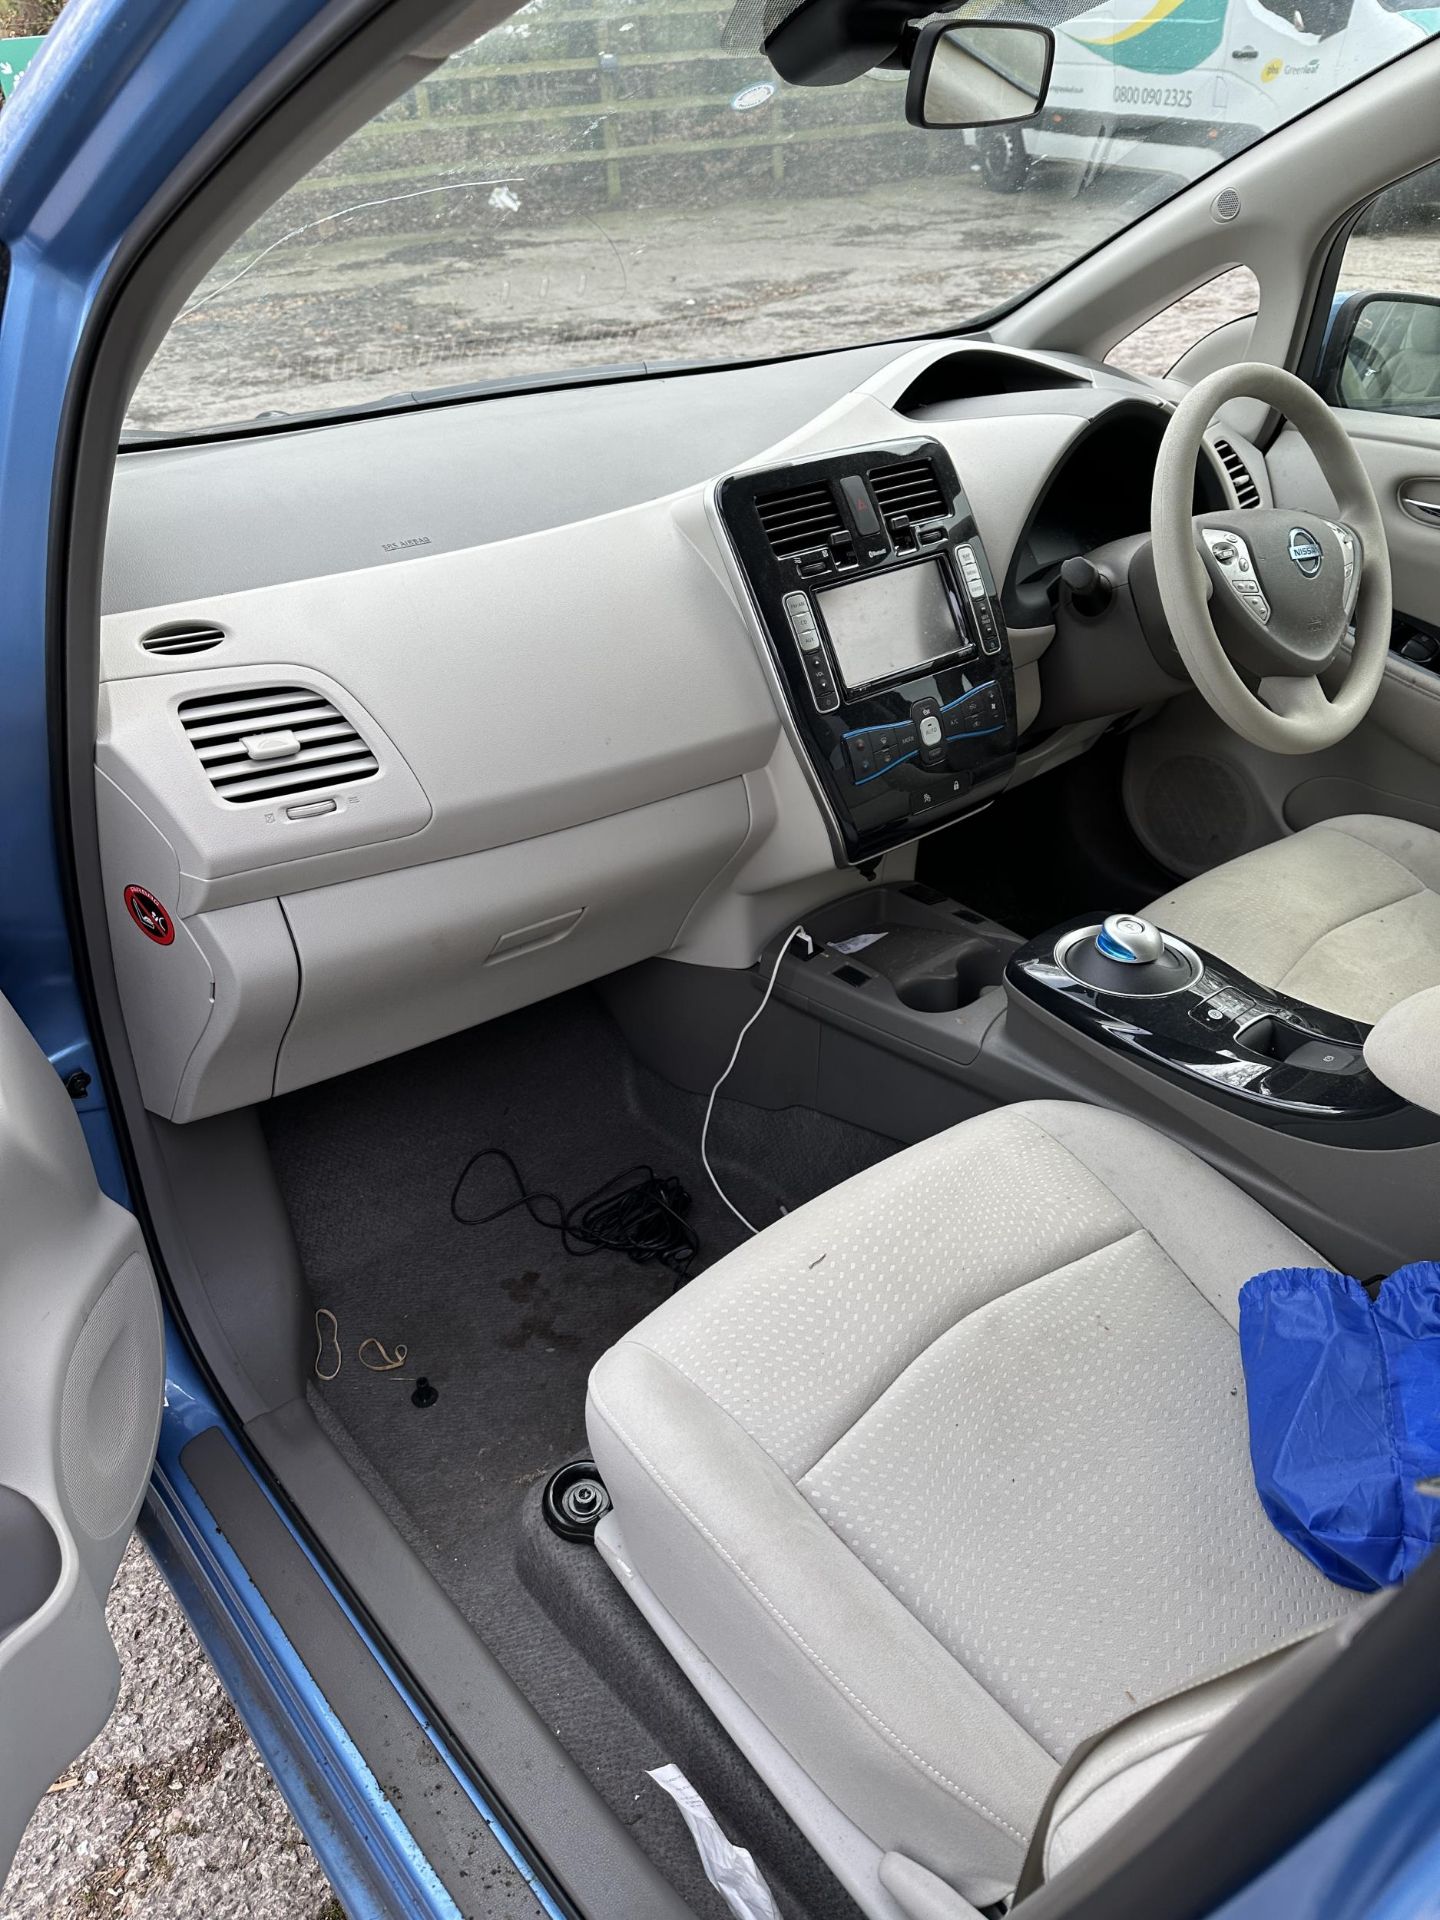 A 2012 NISSAN LEAF ELECTRIC CAR WITH CHARGER, REGISTRATION ML12 LZH. NO KEY, NO V5C, BELIEVED TO - Image 8 of 13